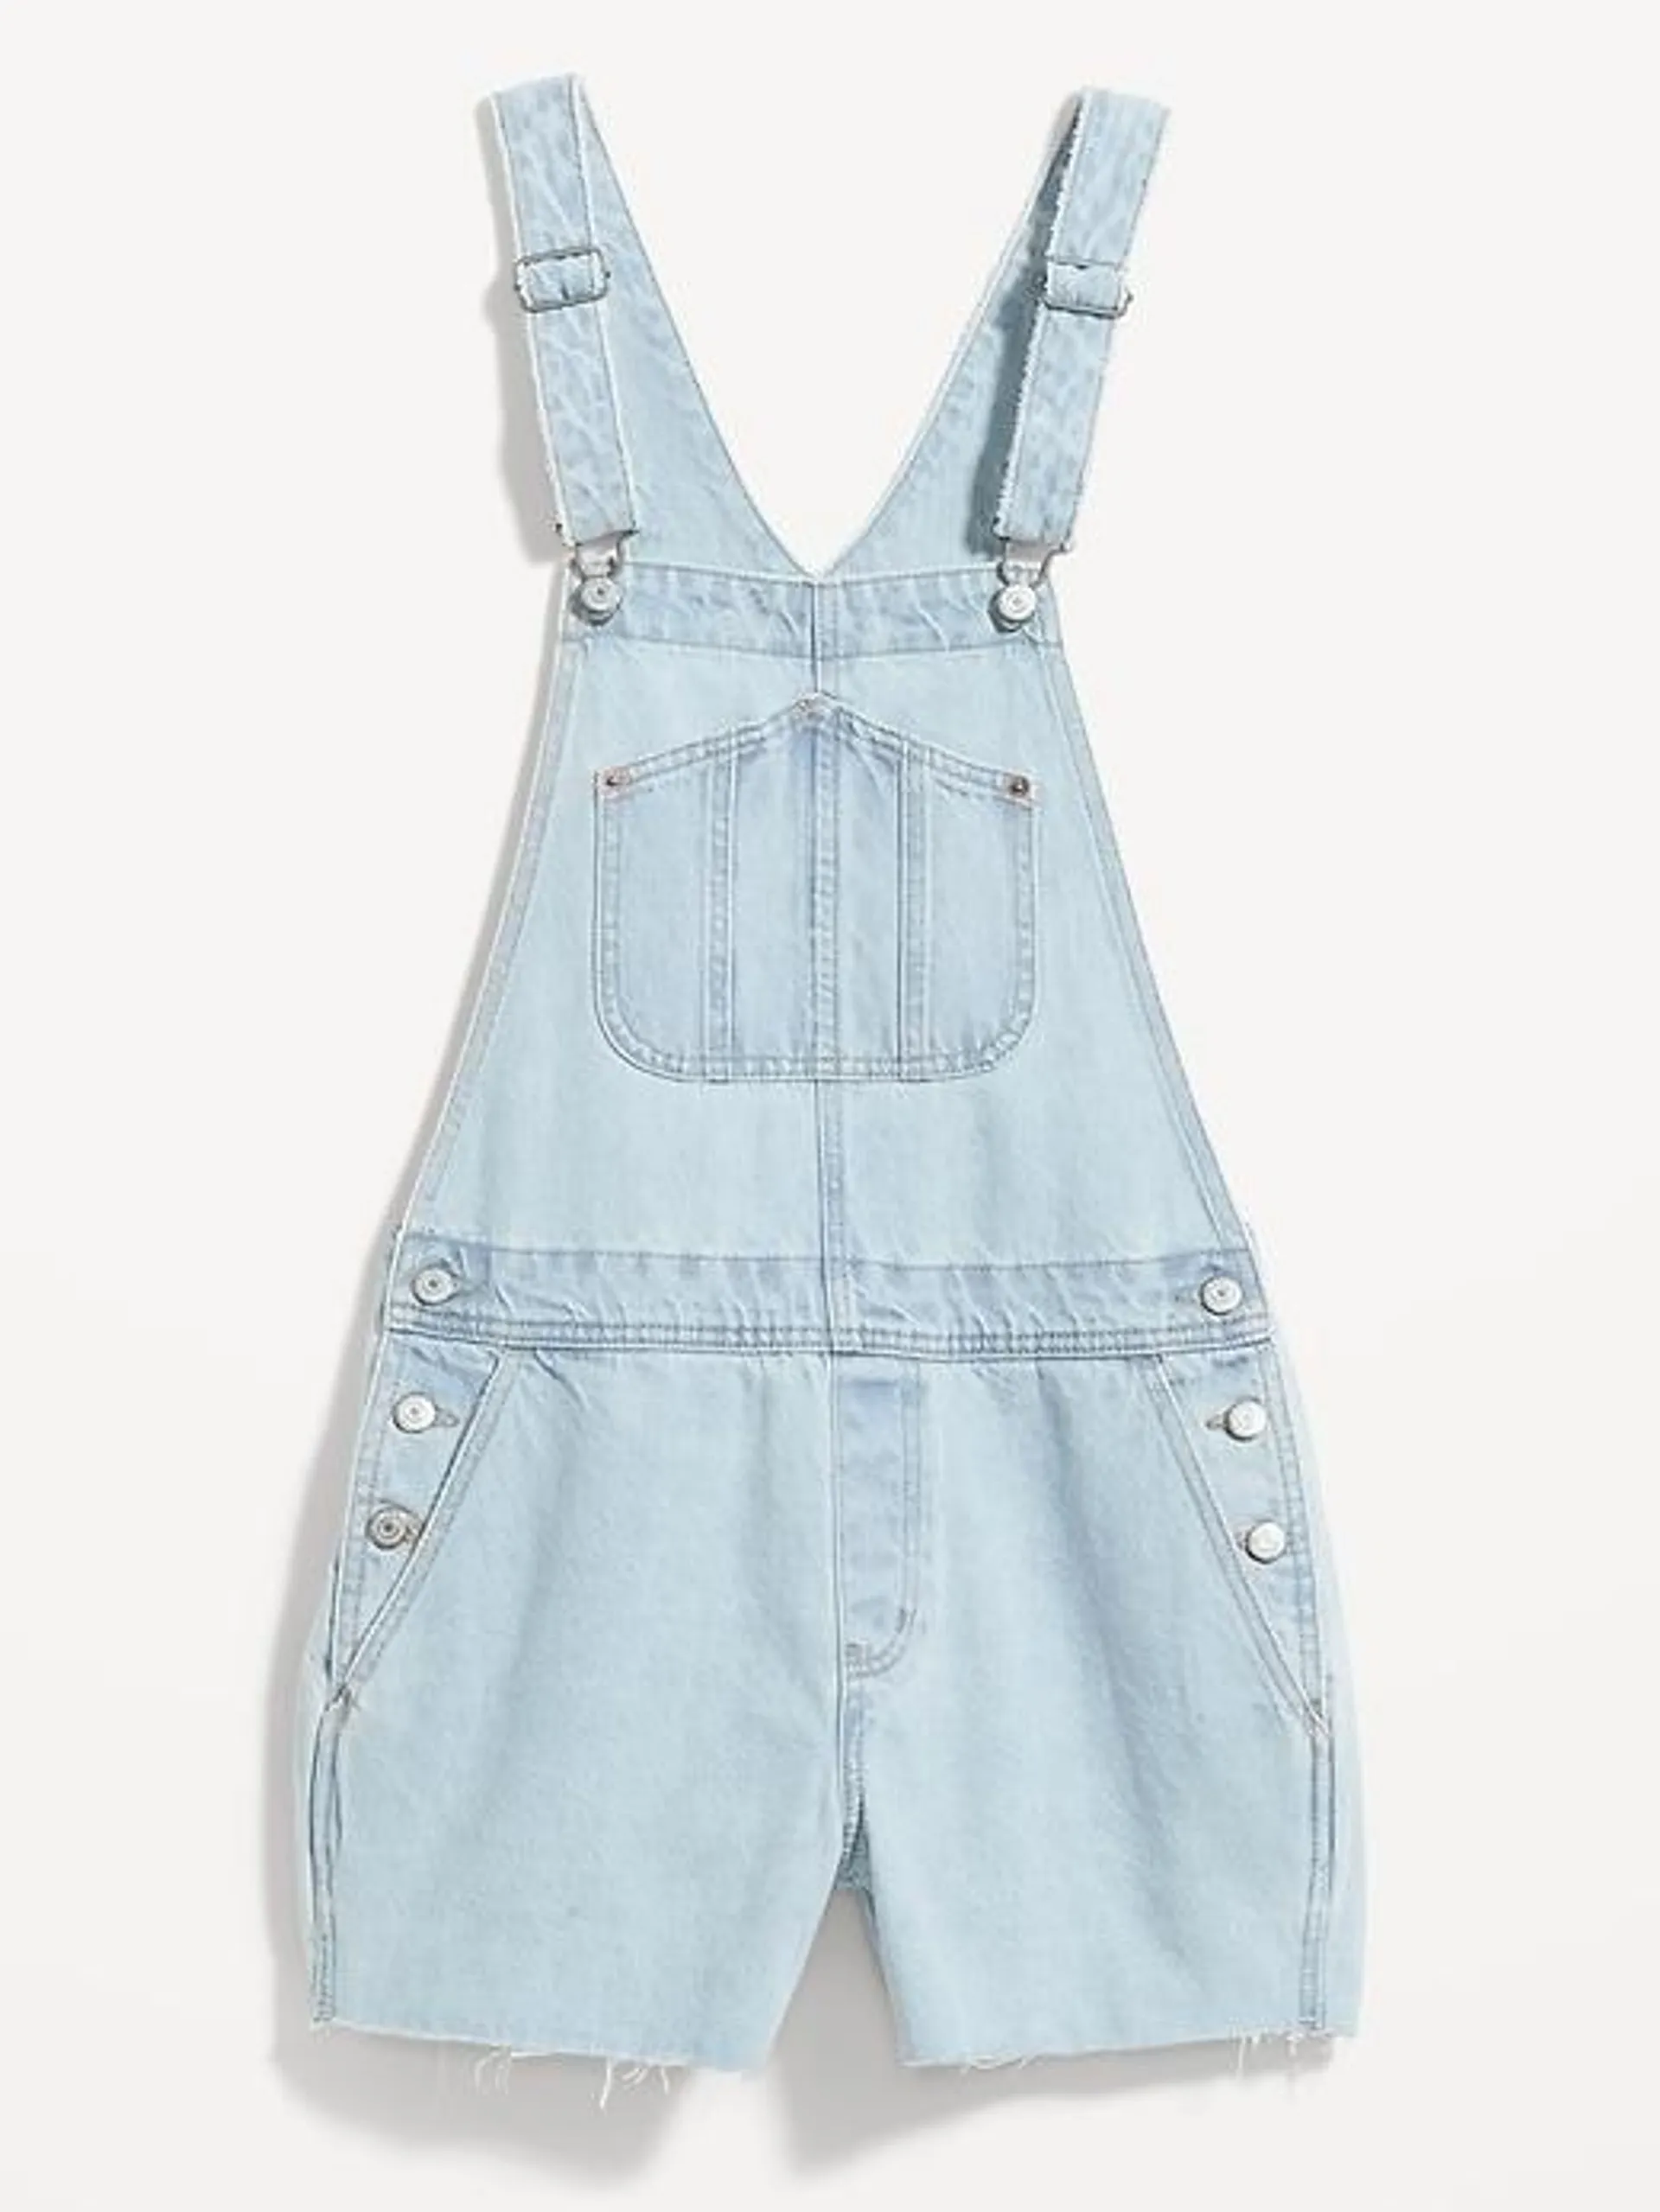 Slouchy Straight Non-Stretch Jean Cut-Off Short Overalls for Women -- 3.5-inch inseam